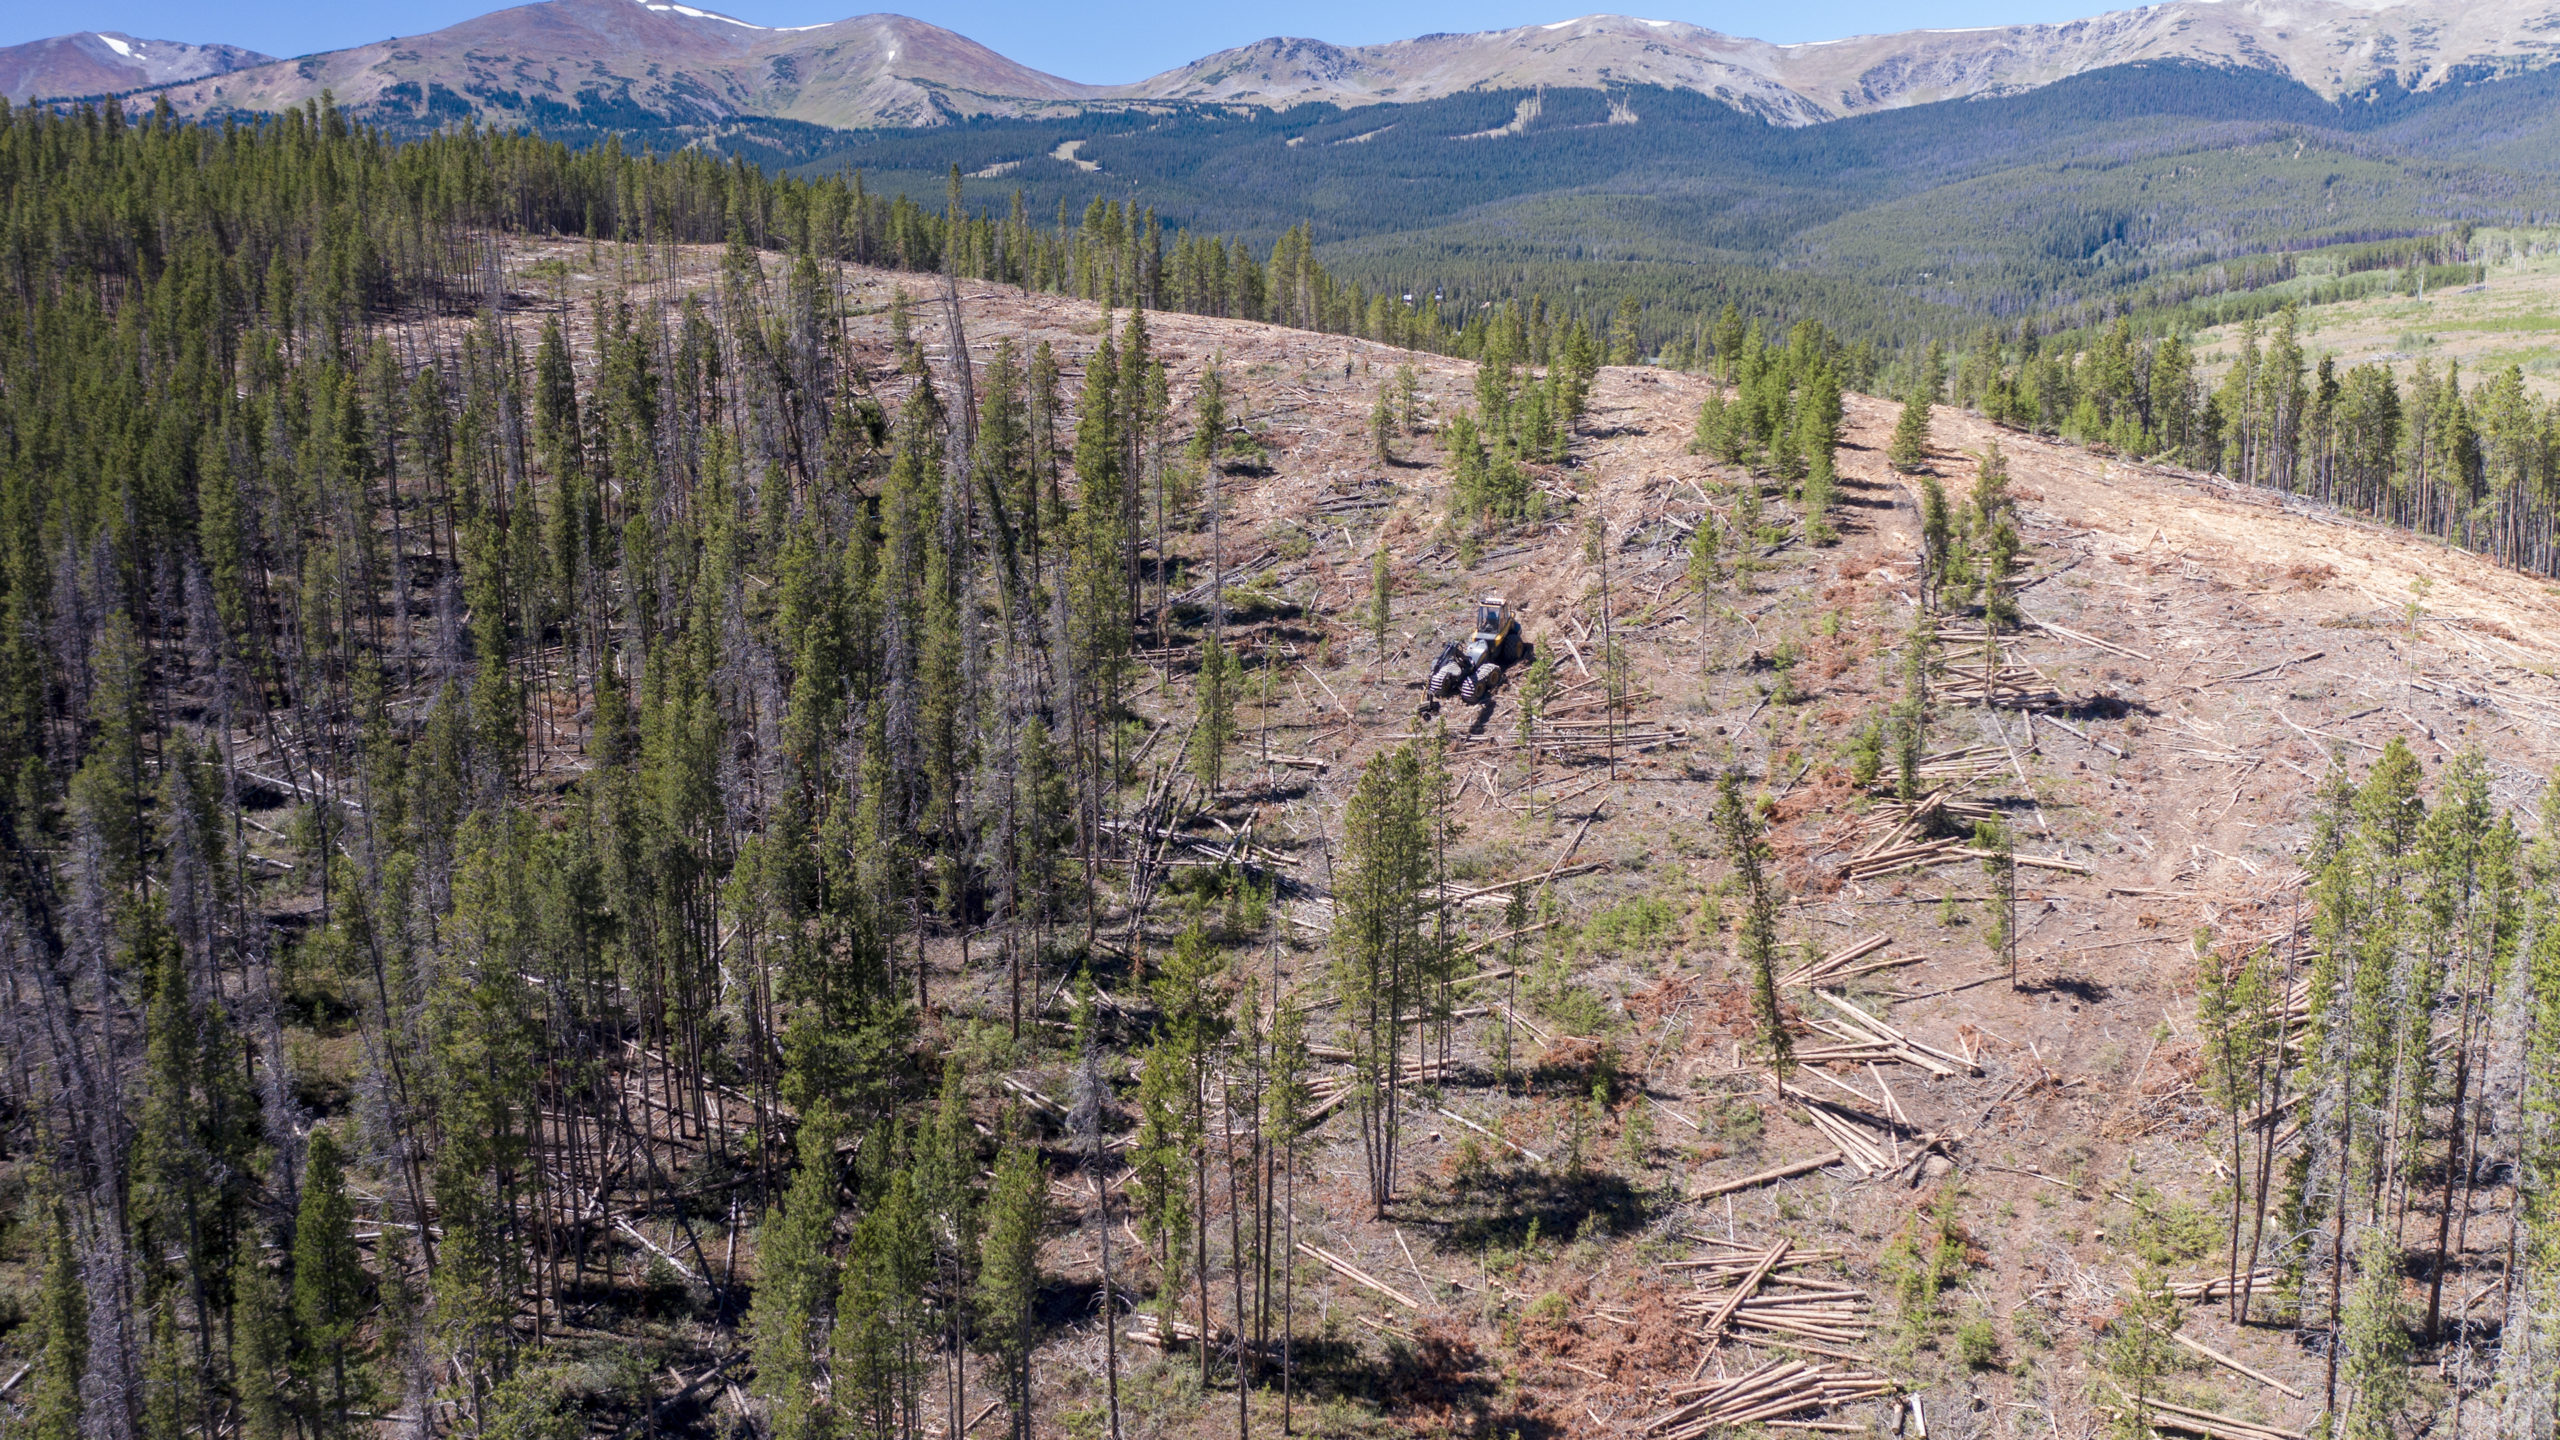 A Ponsse Ergo Harvester remove trees on sleep slopes in the Peak 7 area of Breckenridge, Colorado in August 2020. Photo credit: Denver Water.